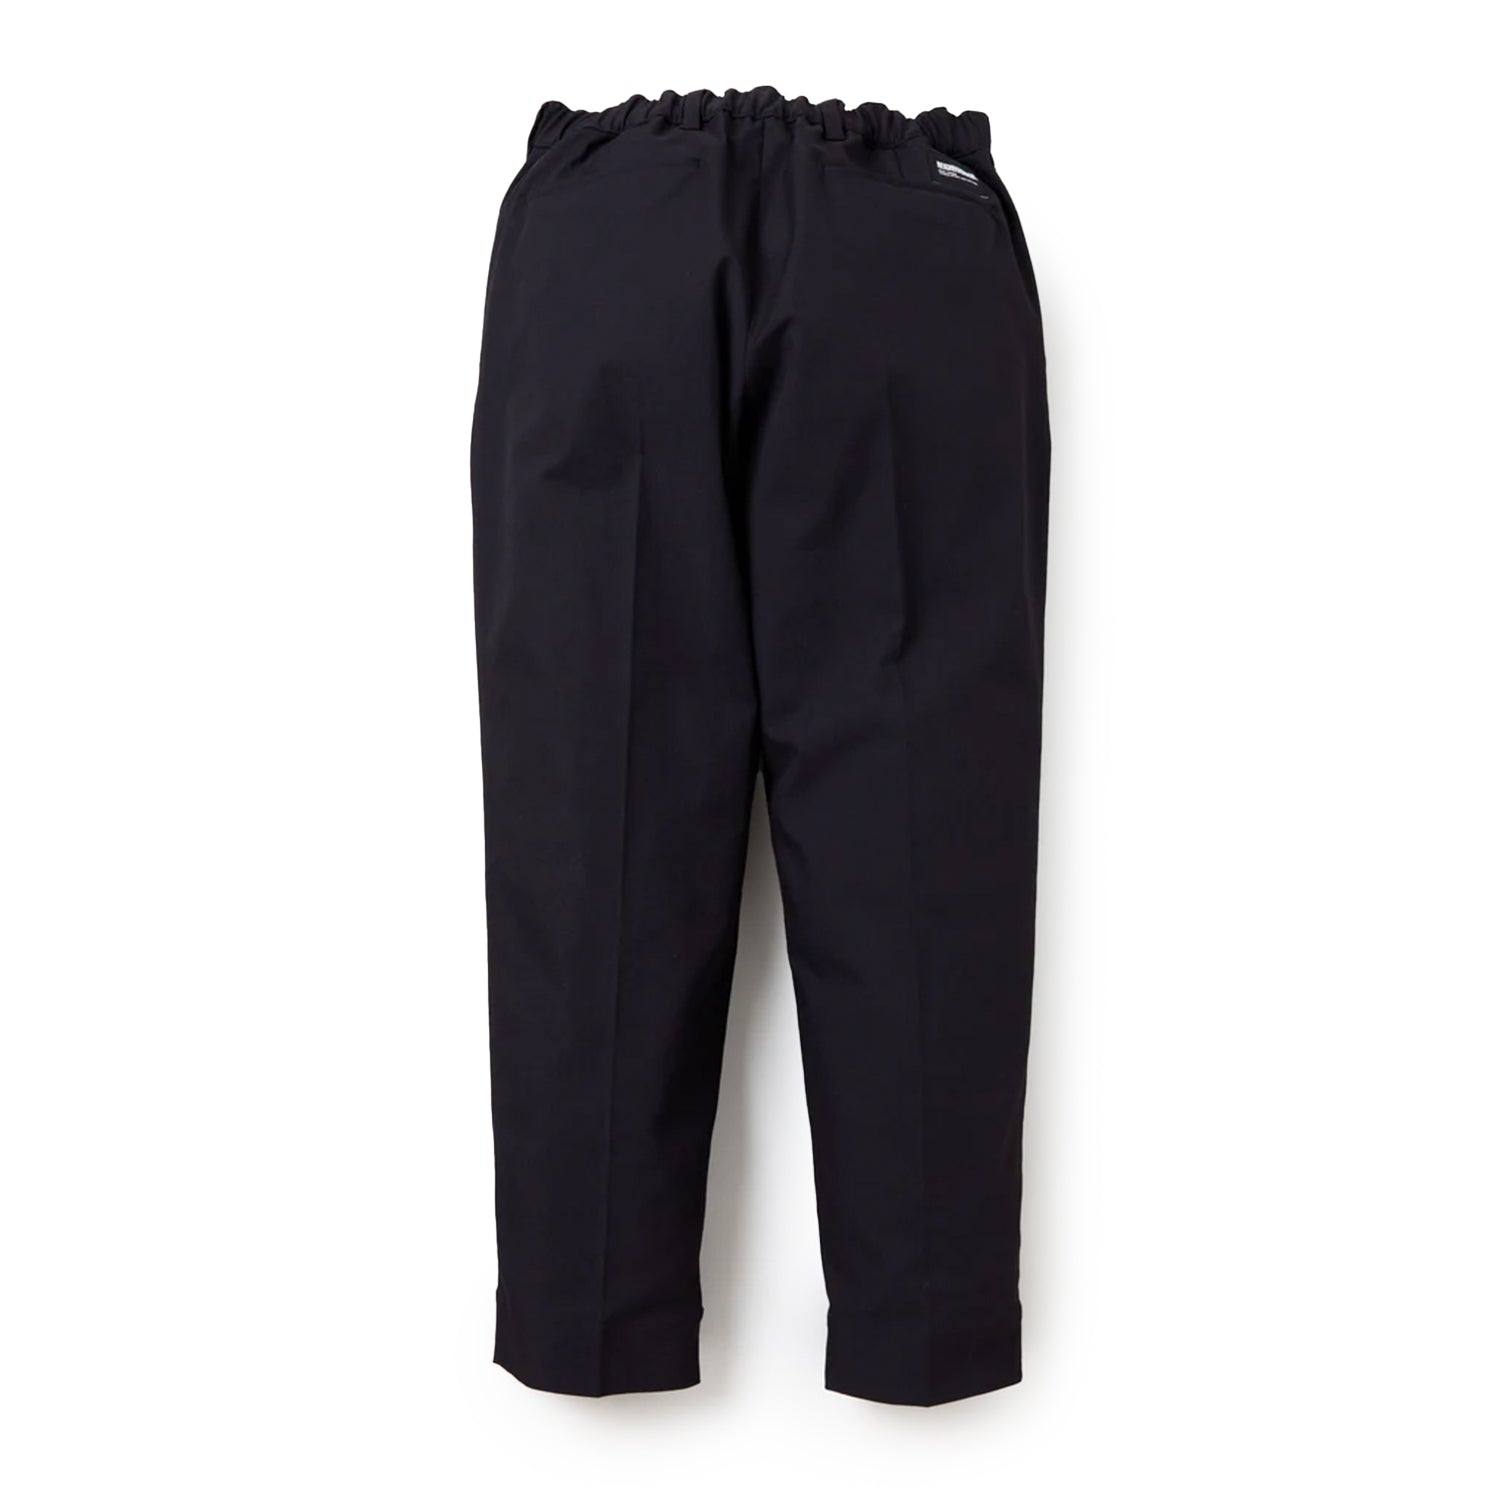 Tapered Silhouette Pants - INVINCIBLE